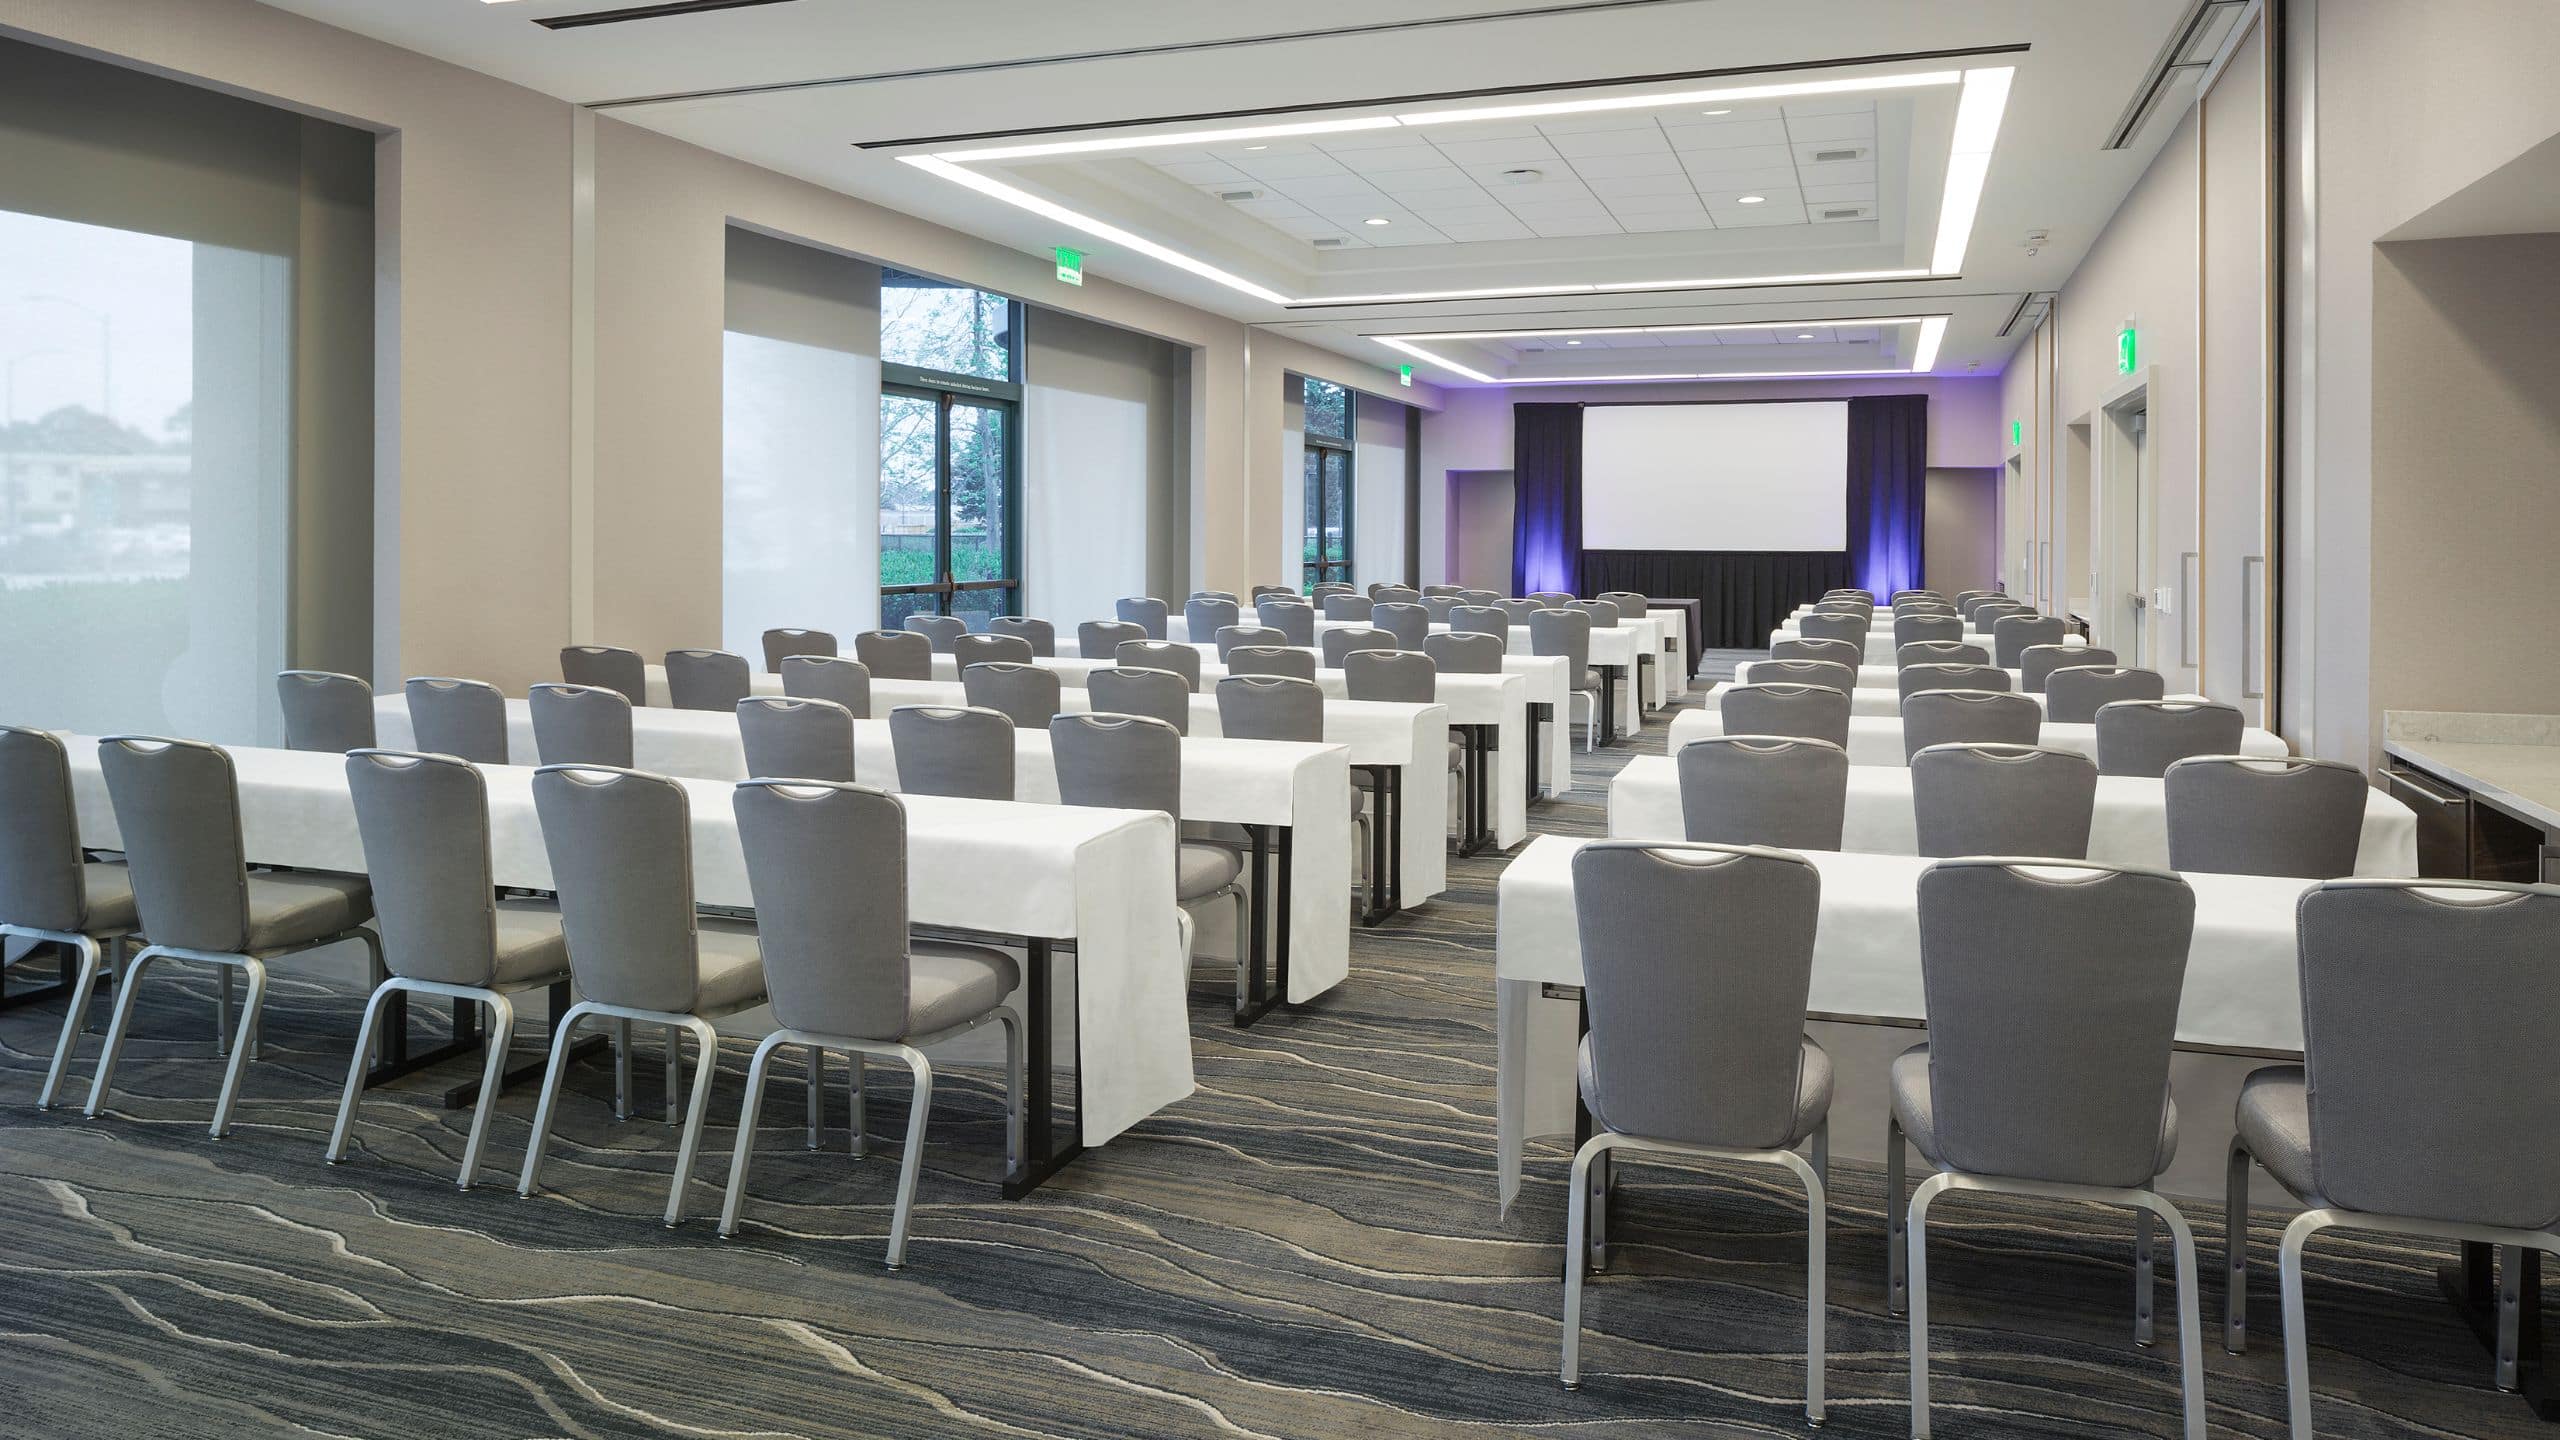 Rows of tables and chairs in ballroom classroom setup